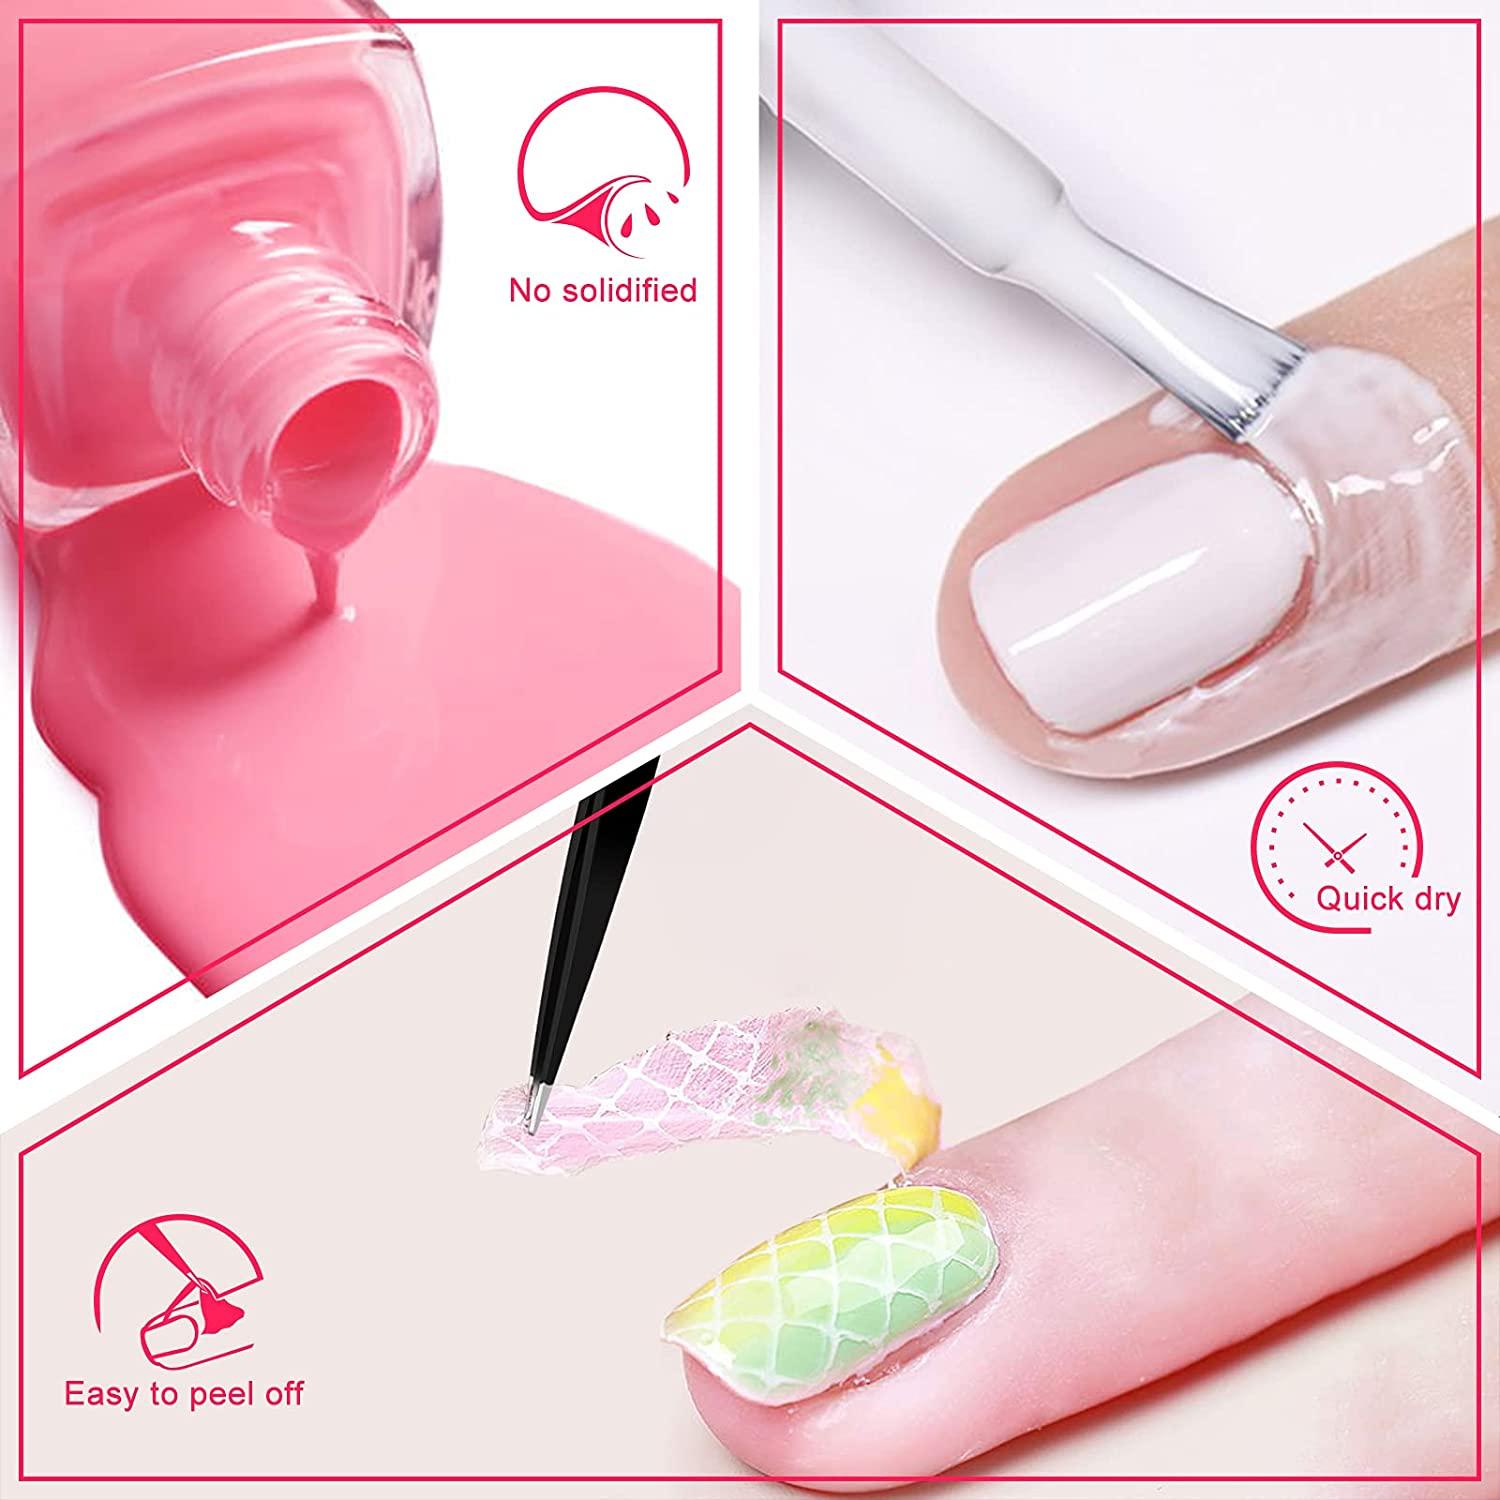 DR. MODE Liquid Latex for Nails - 30ML Upgraded Fast Drying Cuticle  Protectors Peel Off Nail Polish Barrier, Nail Stamping Skin Protector Latex  Tape with Bonus Tweezers for Various Nail Art 3